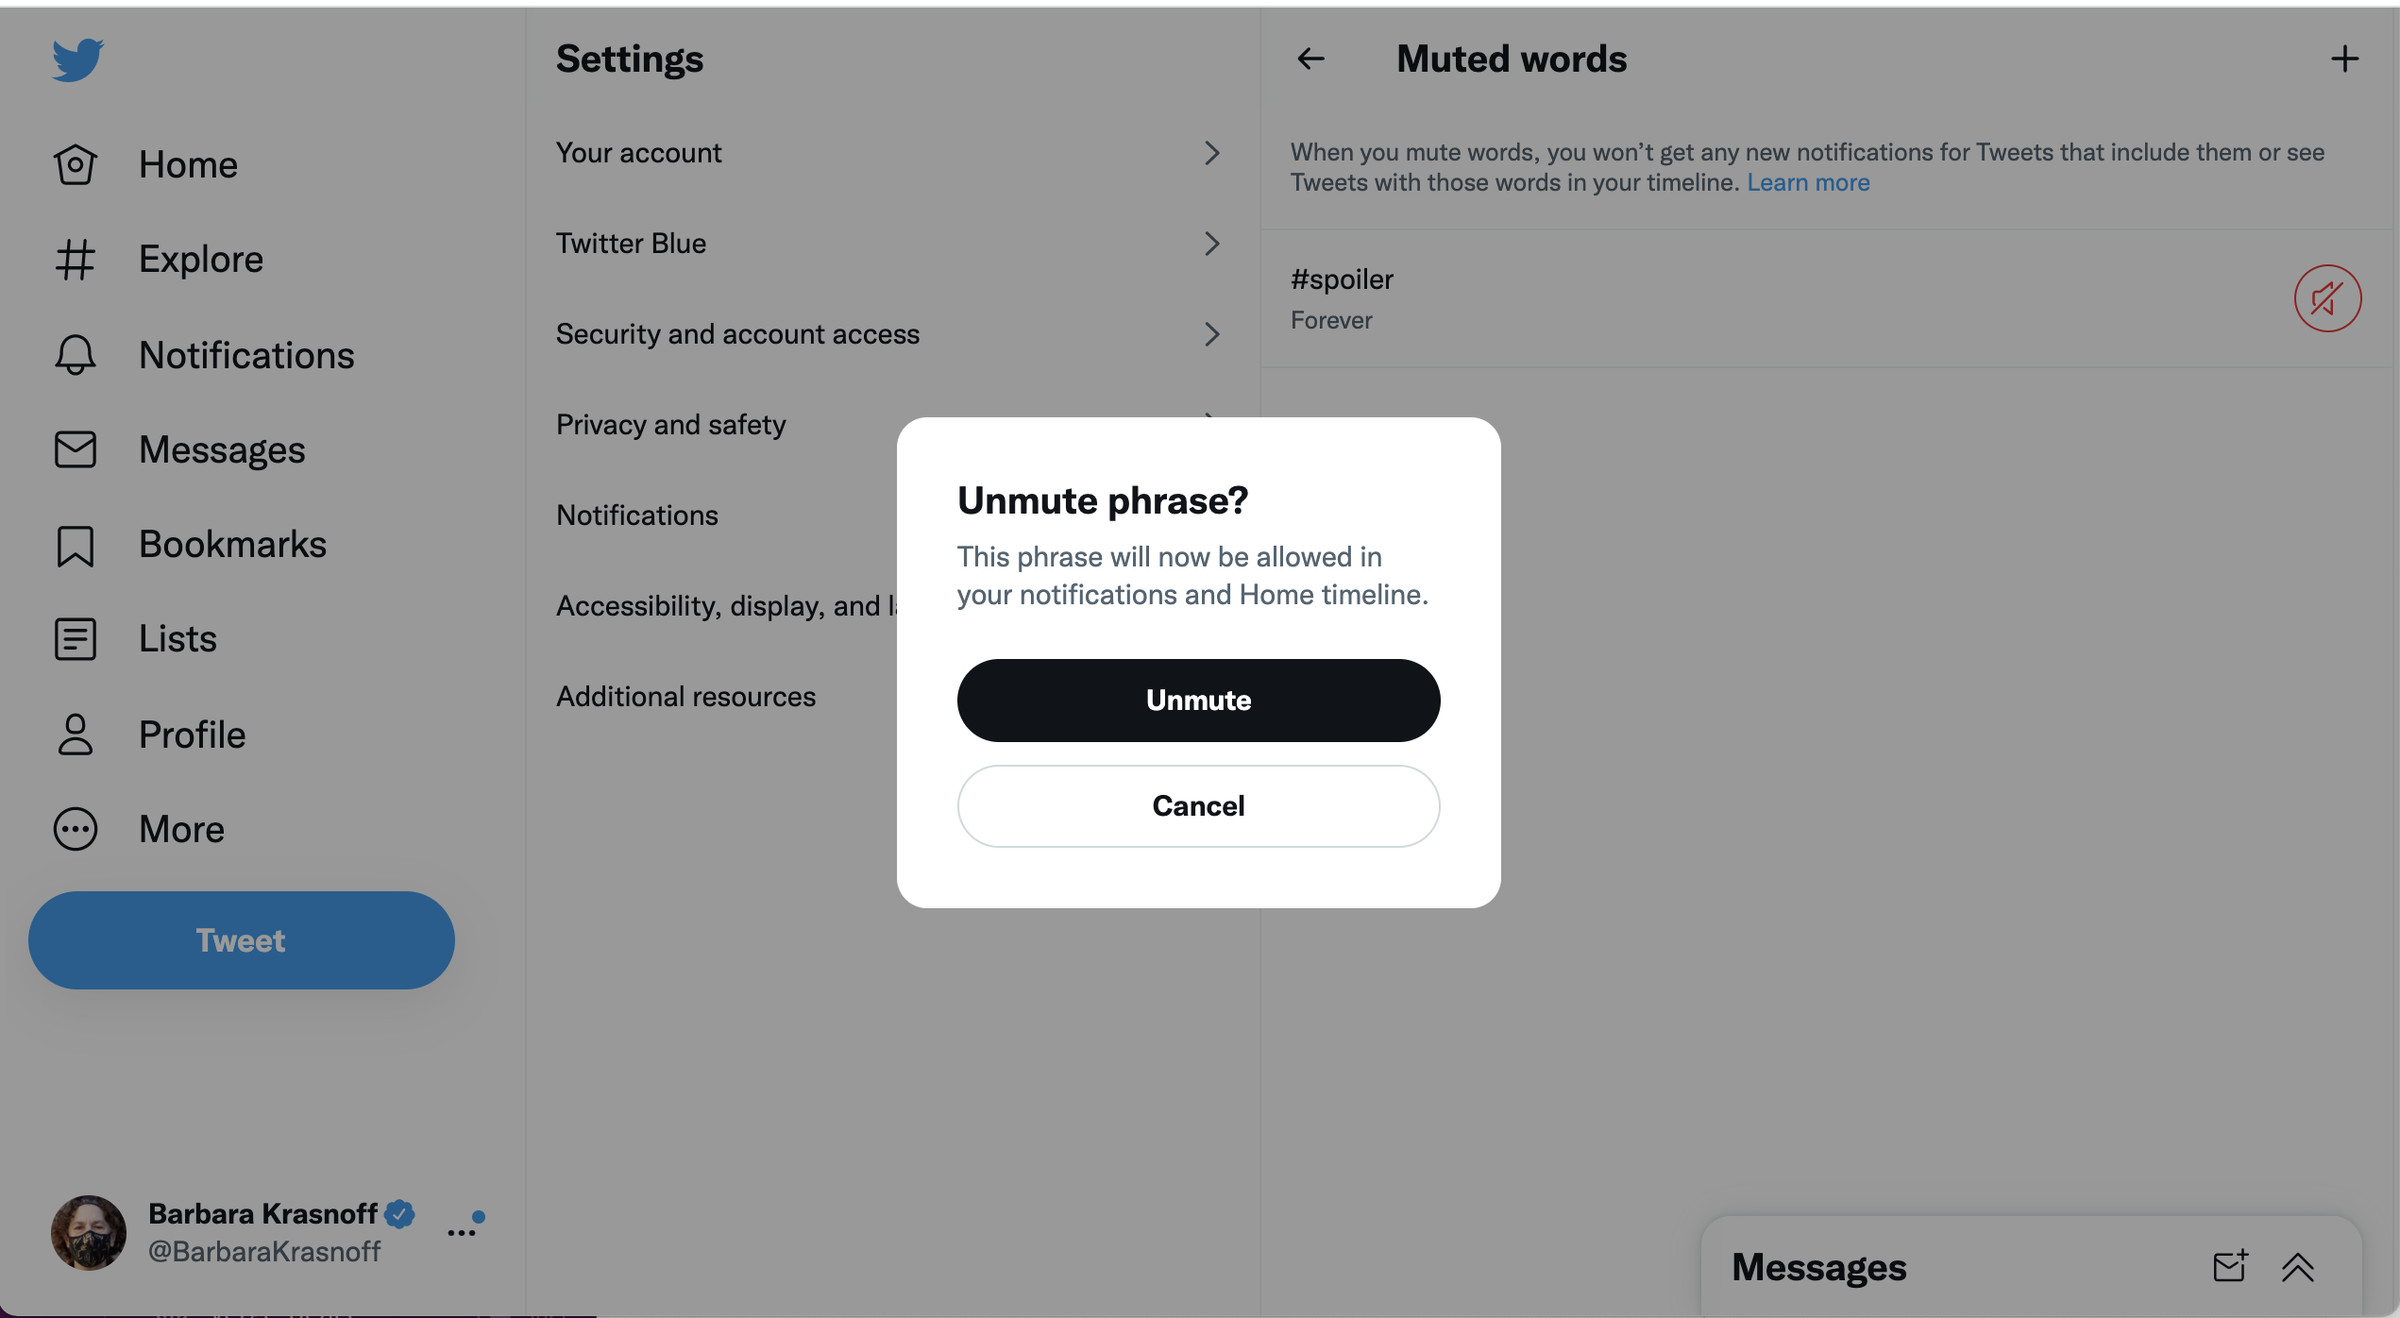 It’s simple to go back and unmute a word or phrase.